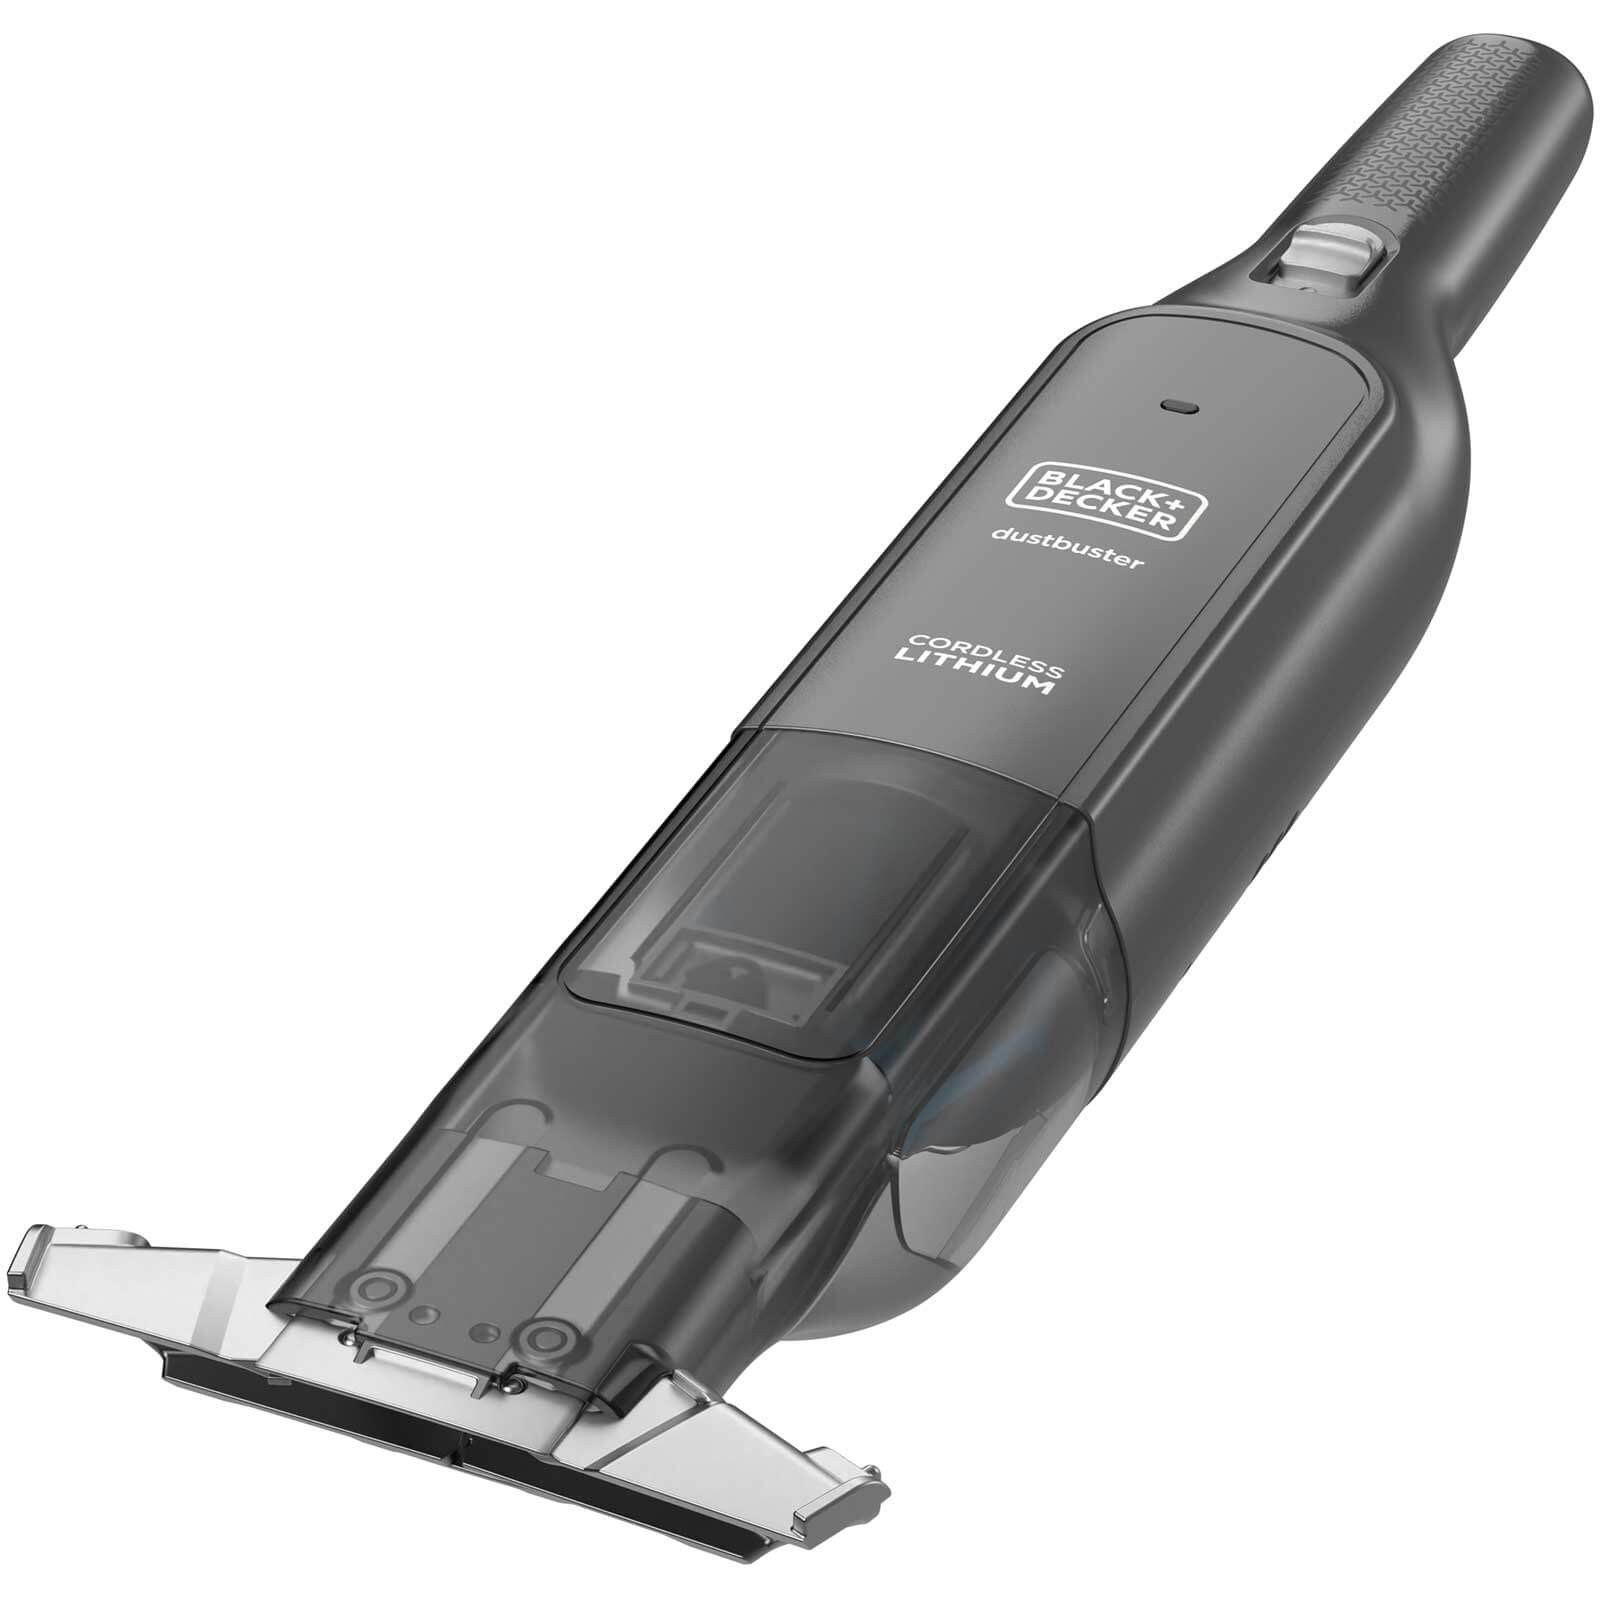 Image of Black and Decker HLVC320B11 12v Cordless Base Slim Dustbuster Hand Vacuum 1 x 1.5ah Integrated Li-ion Charger No Case